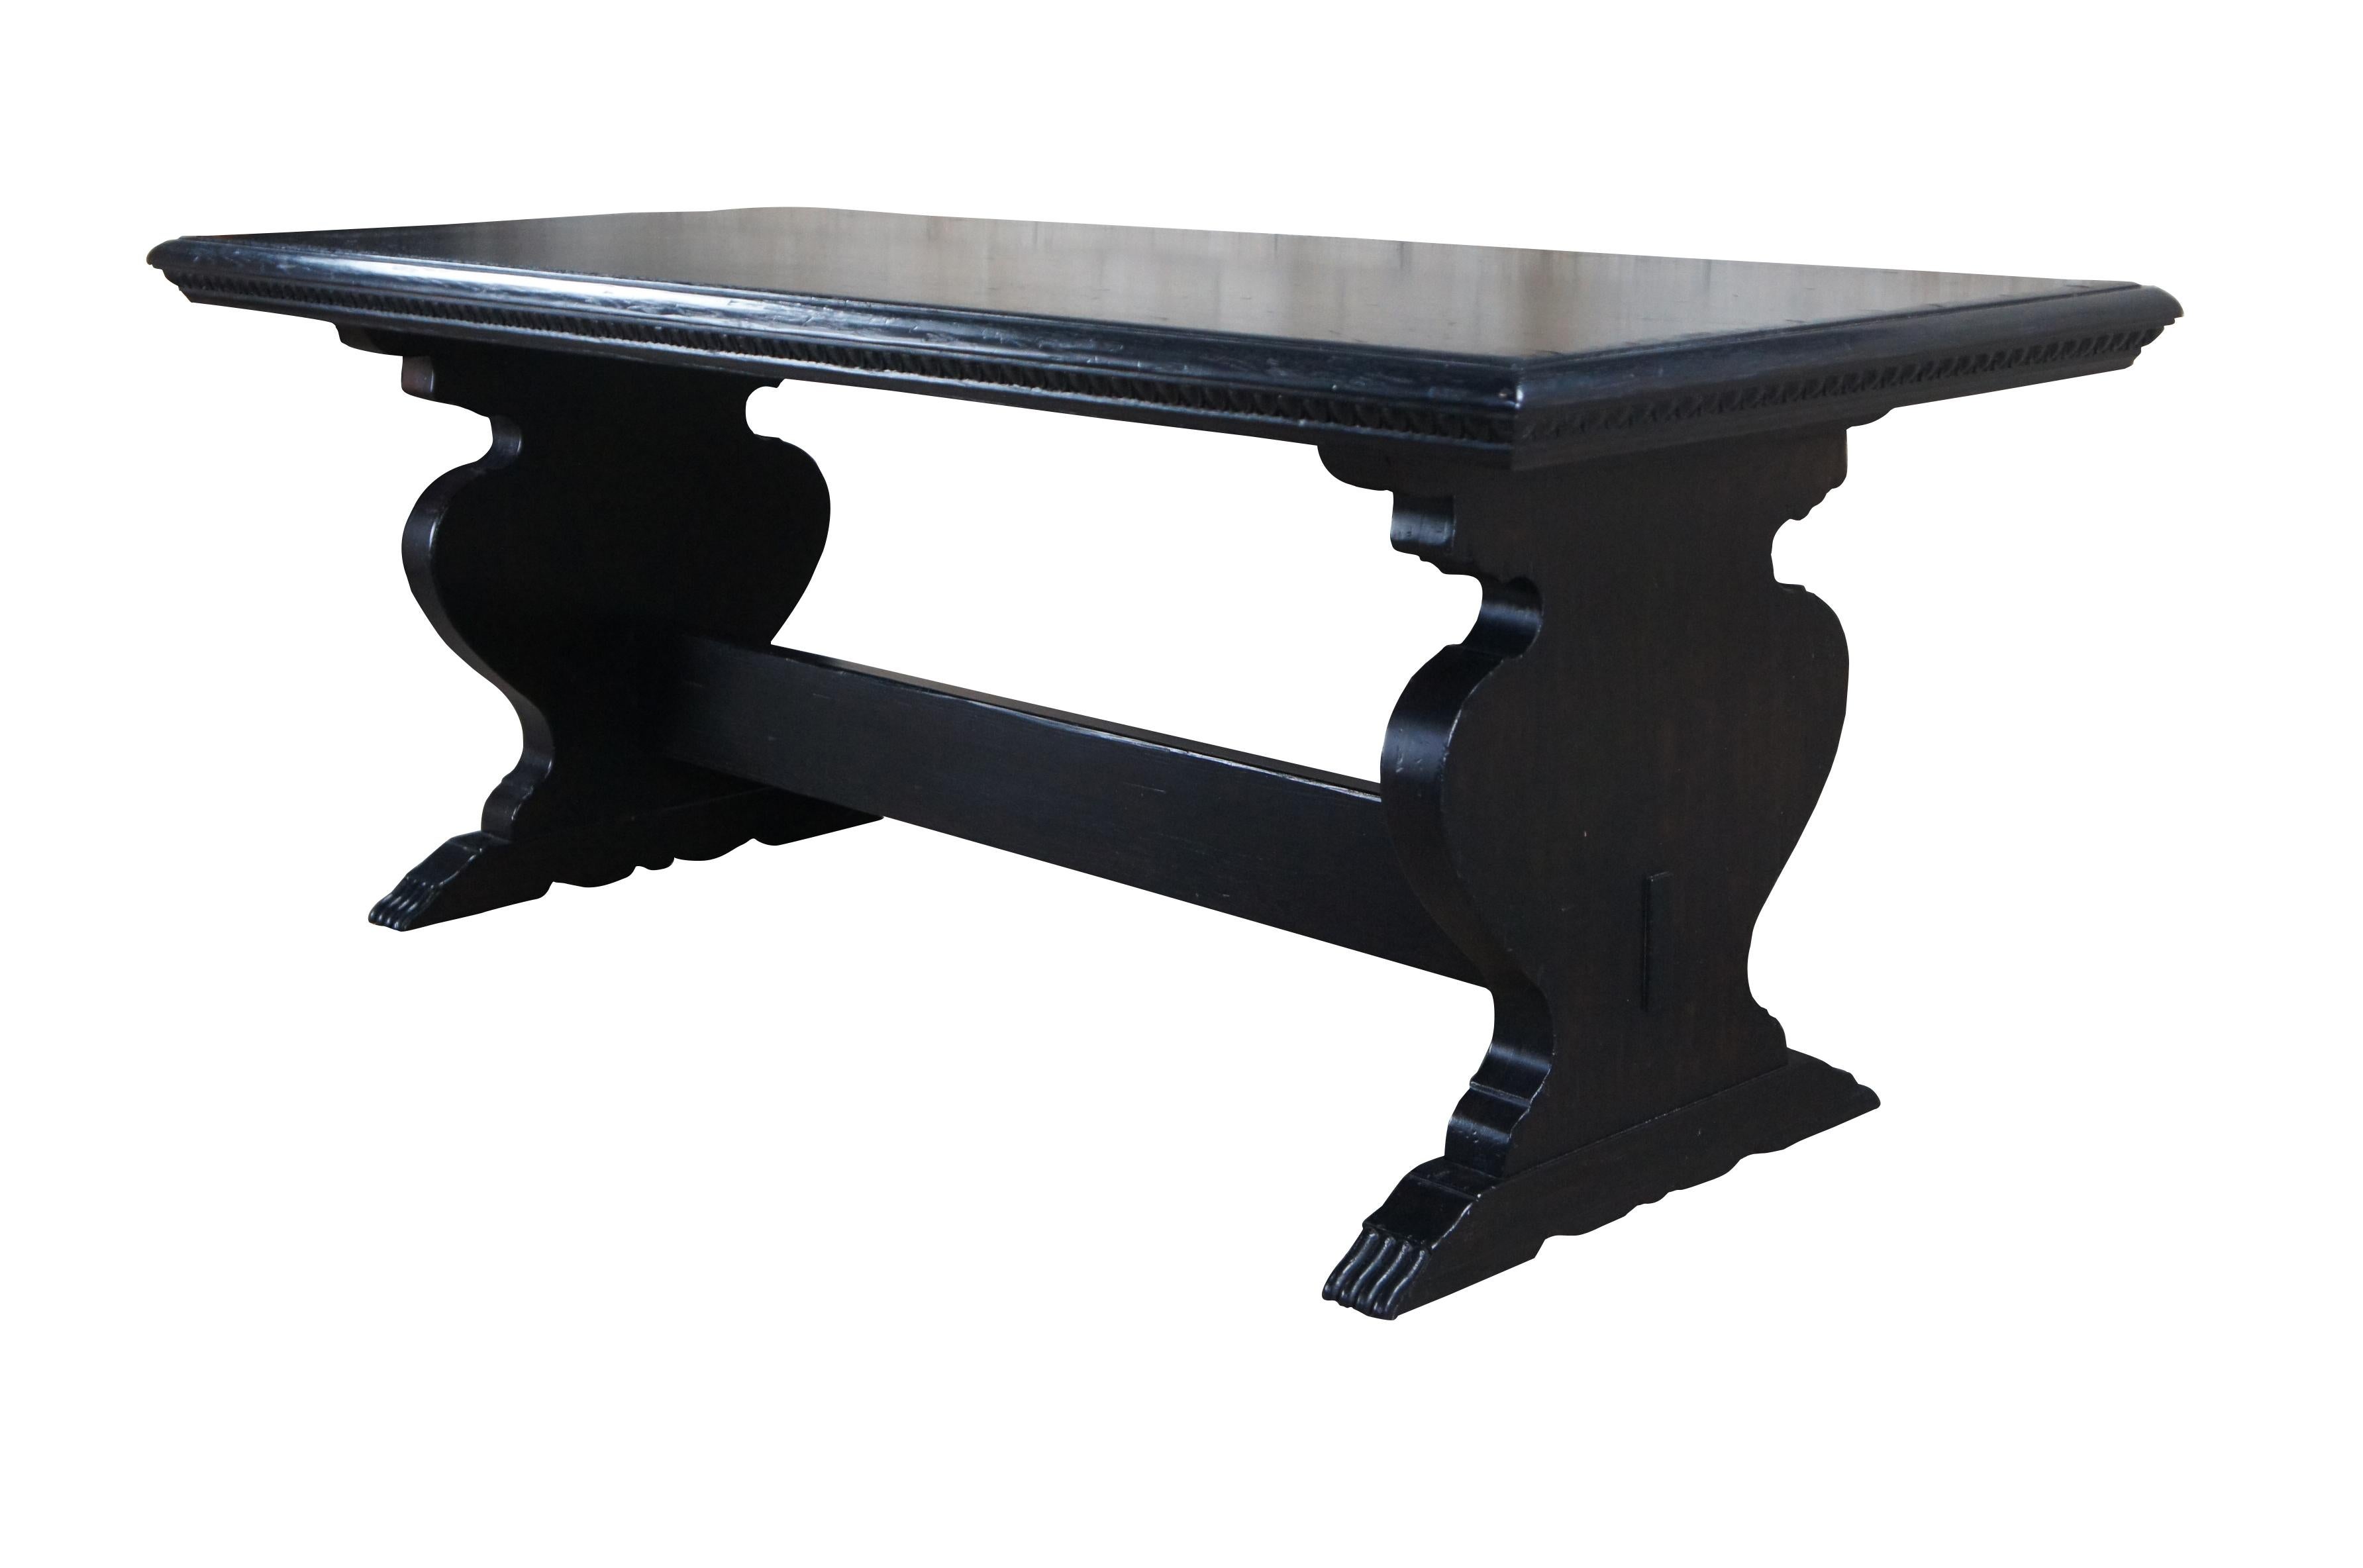 An exquisite library, dining table or desk by Ralph Lauren.  Drawing inspiration from French Provincial & Gothic styling.  Made from solid oak with a rectangular top supported by two vase shaped supports leading to paw feet.  The supports are